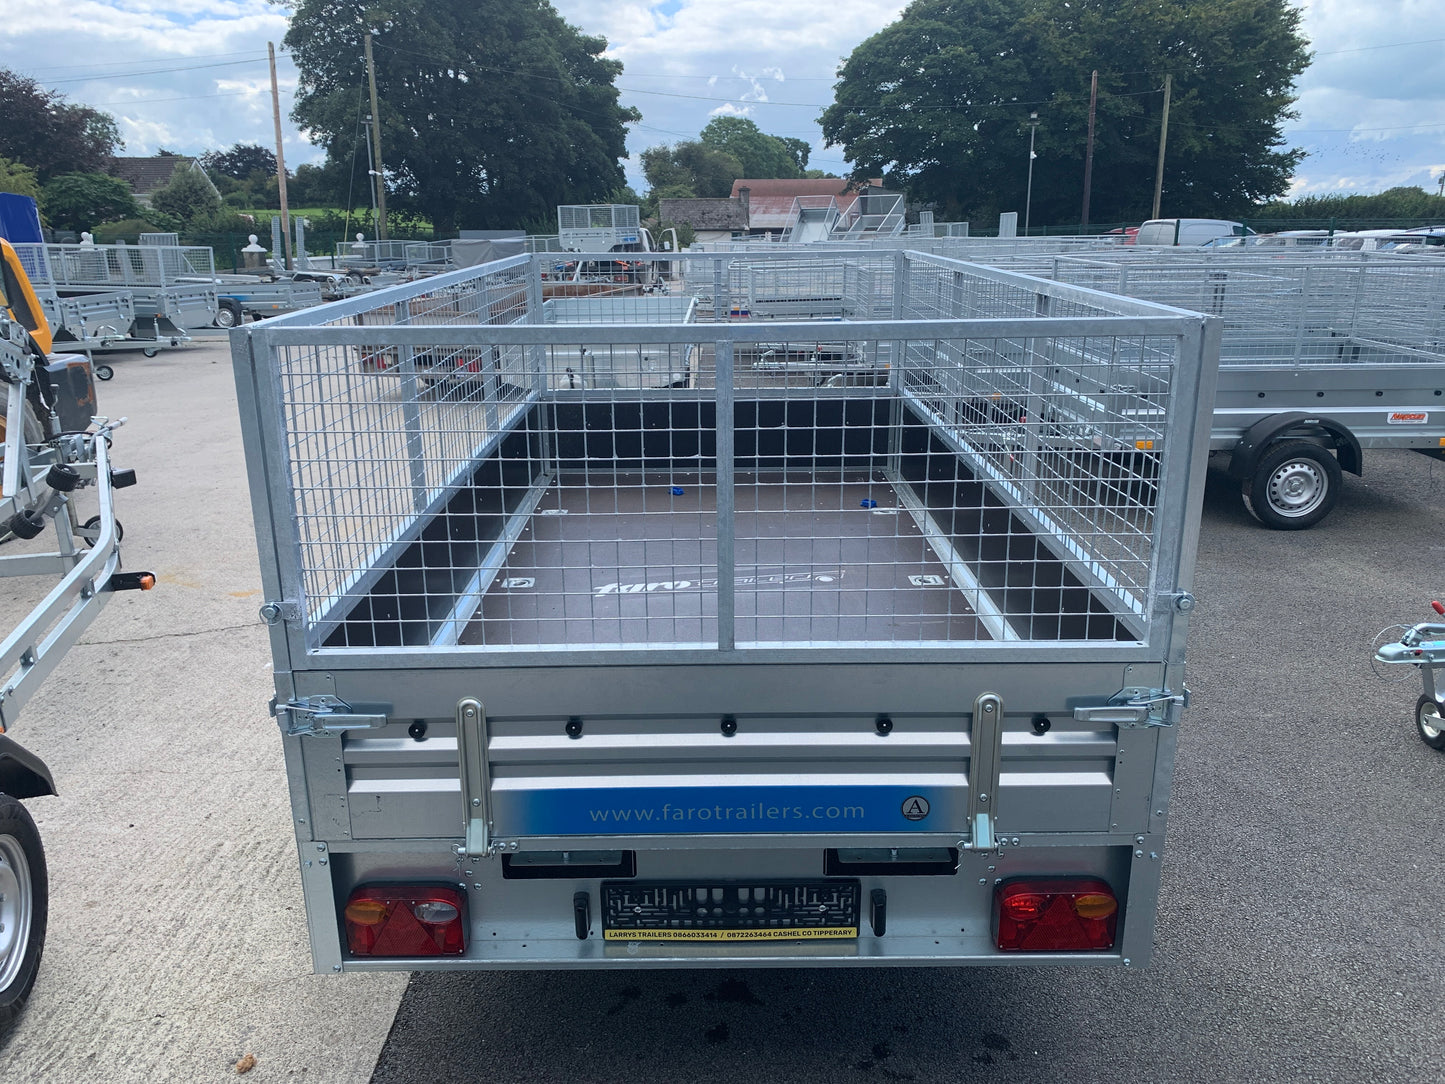 10 x 5 Dropside Trailer Braked with Mesh